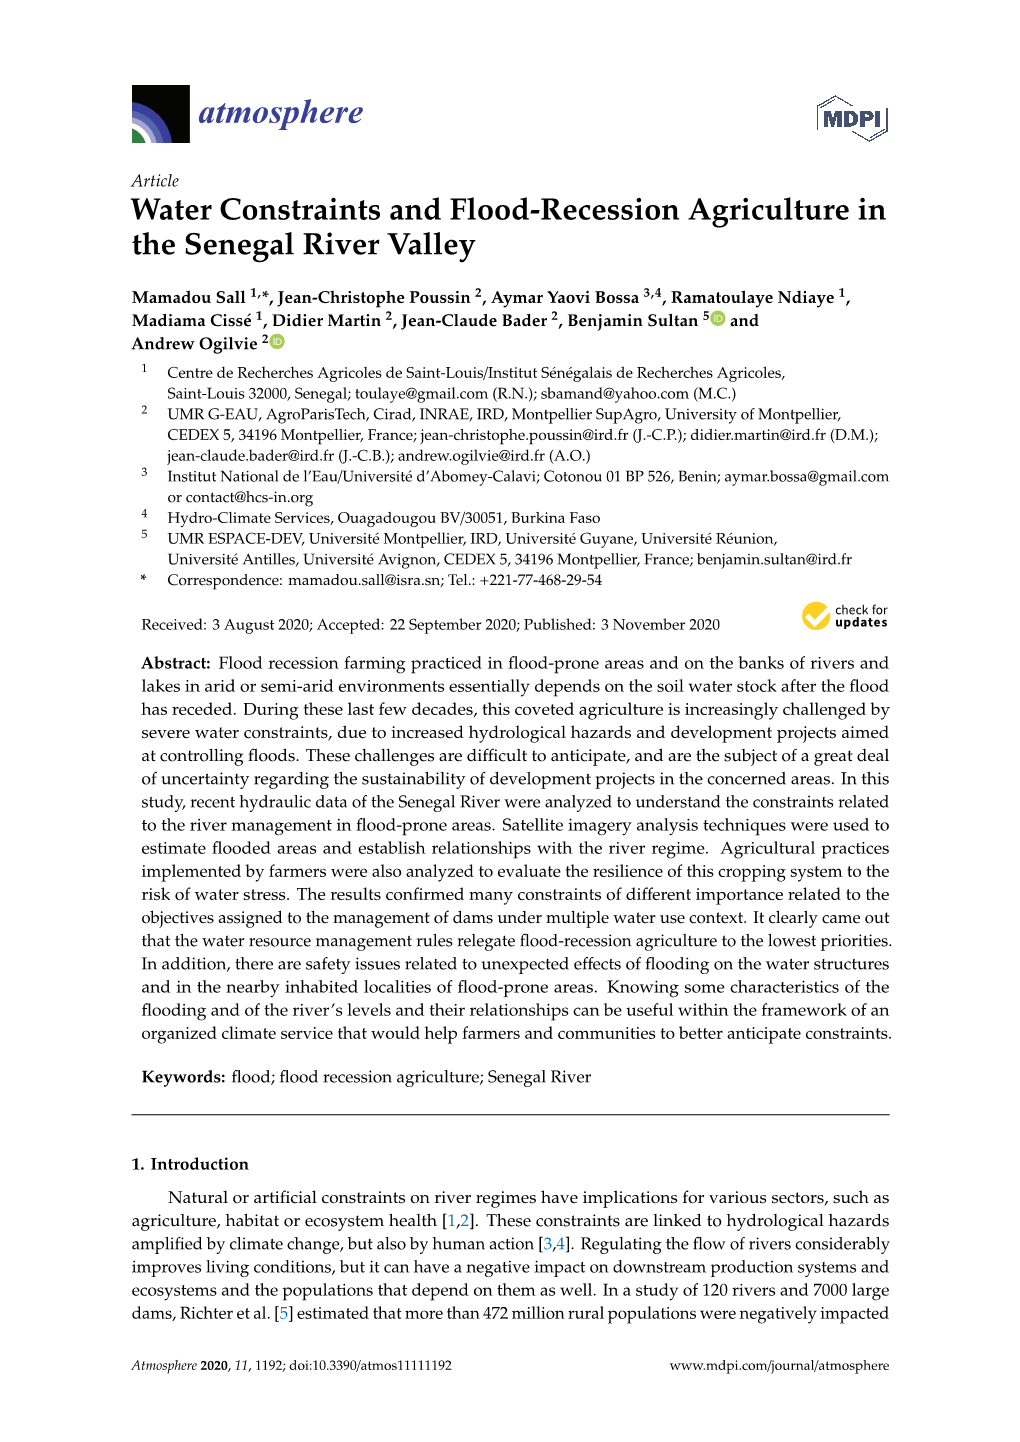 Water Constraints and Flood-Recession Agriculture in the Senegal River Valley